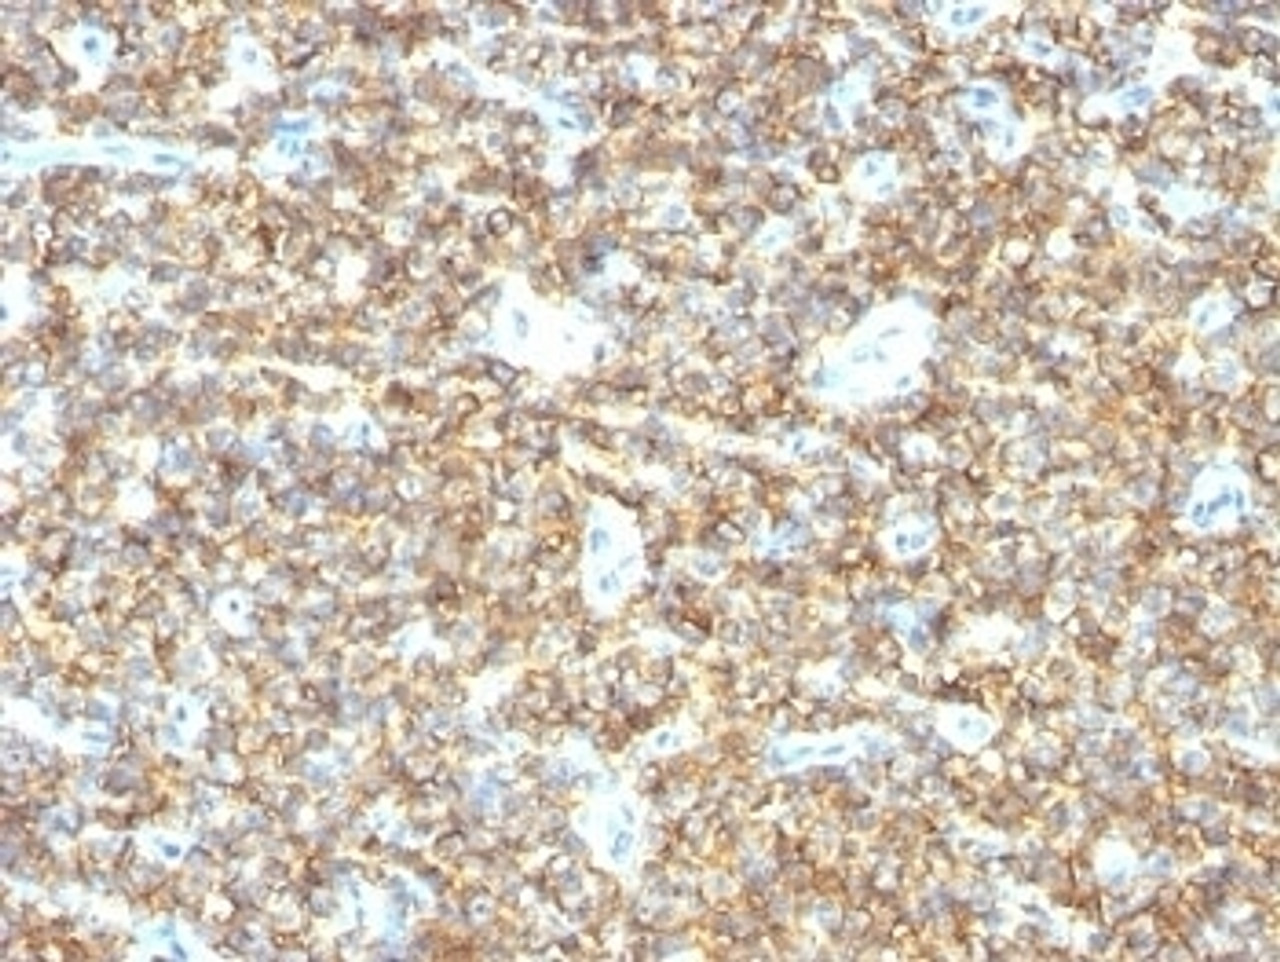 Formalin-fixed, paraffin-embedded human Ewing's sarcoma stained with CD99 antibody (HO36-1.1) .